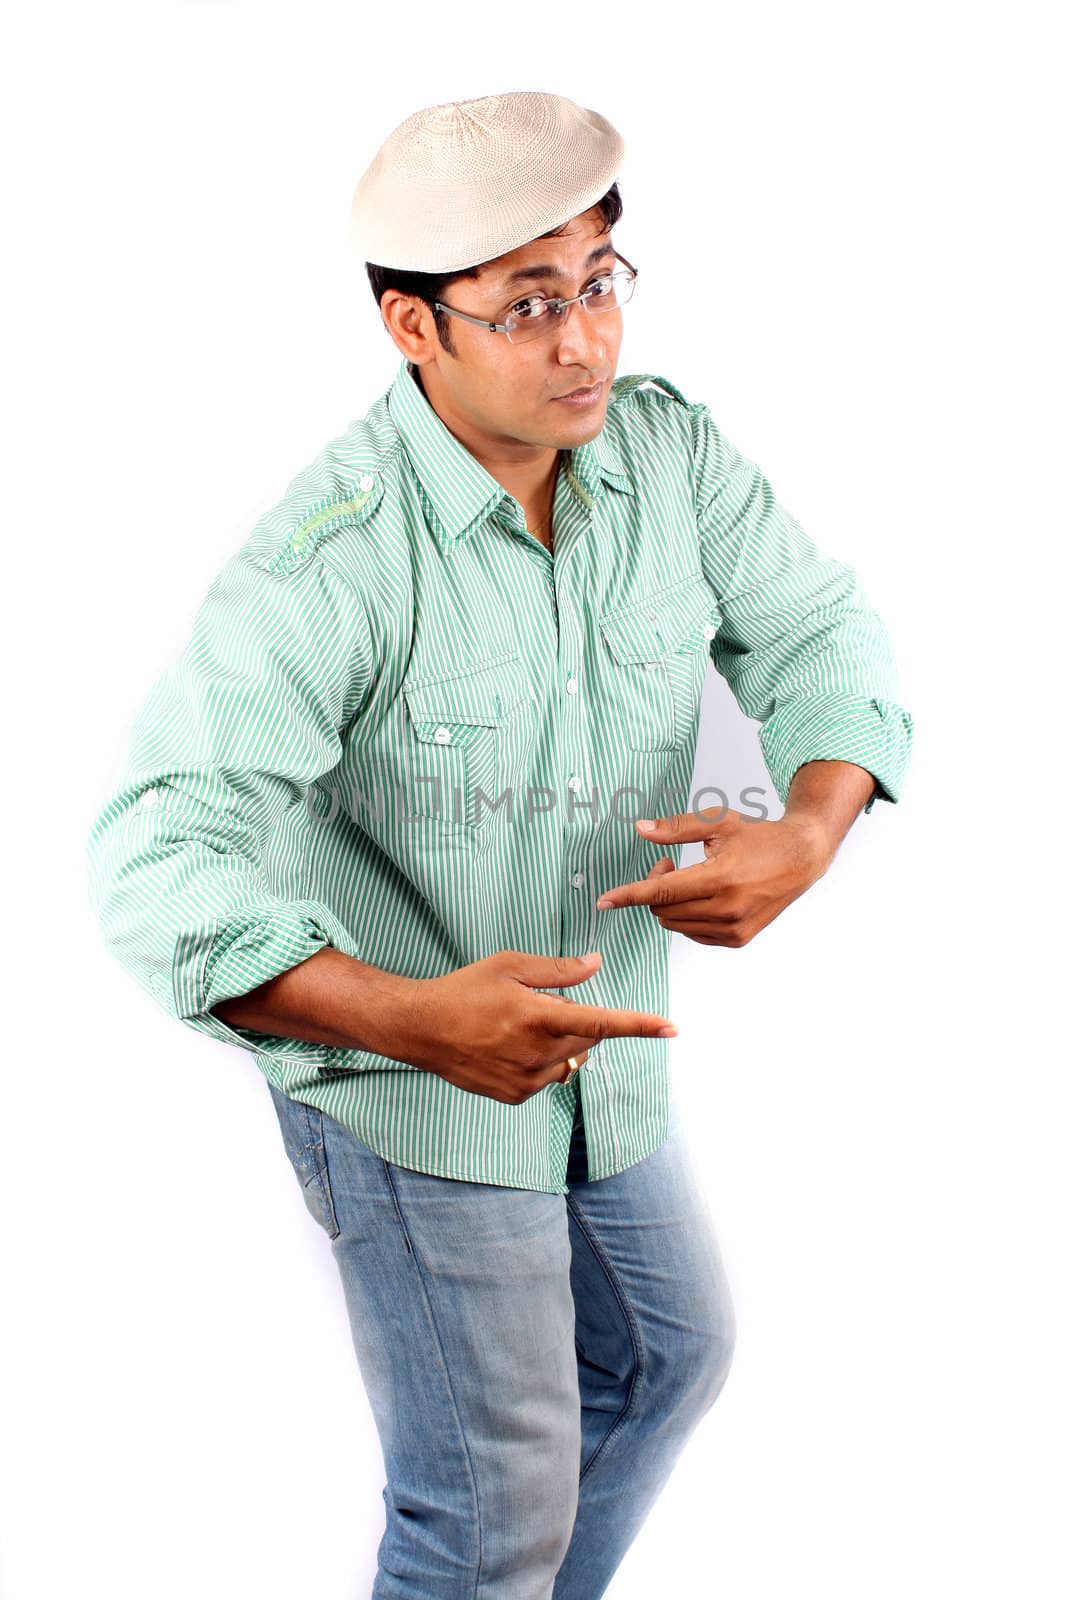 An Indian actor in a funny mood, on white studio background.